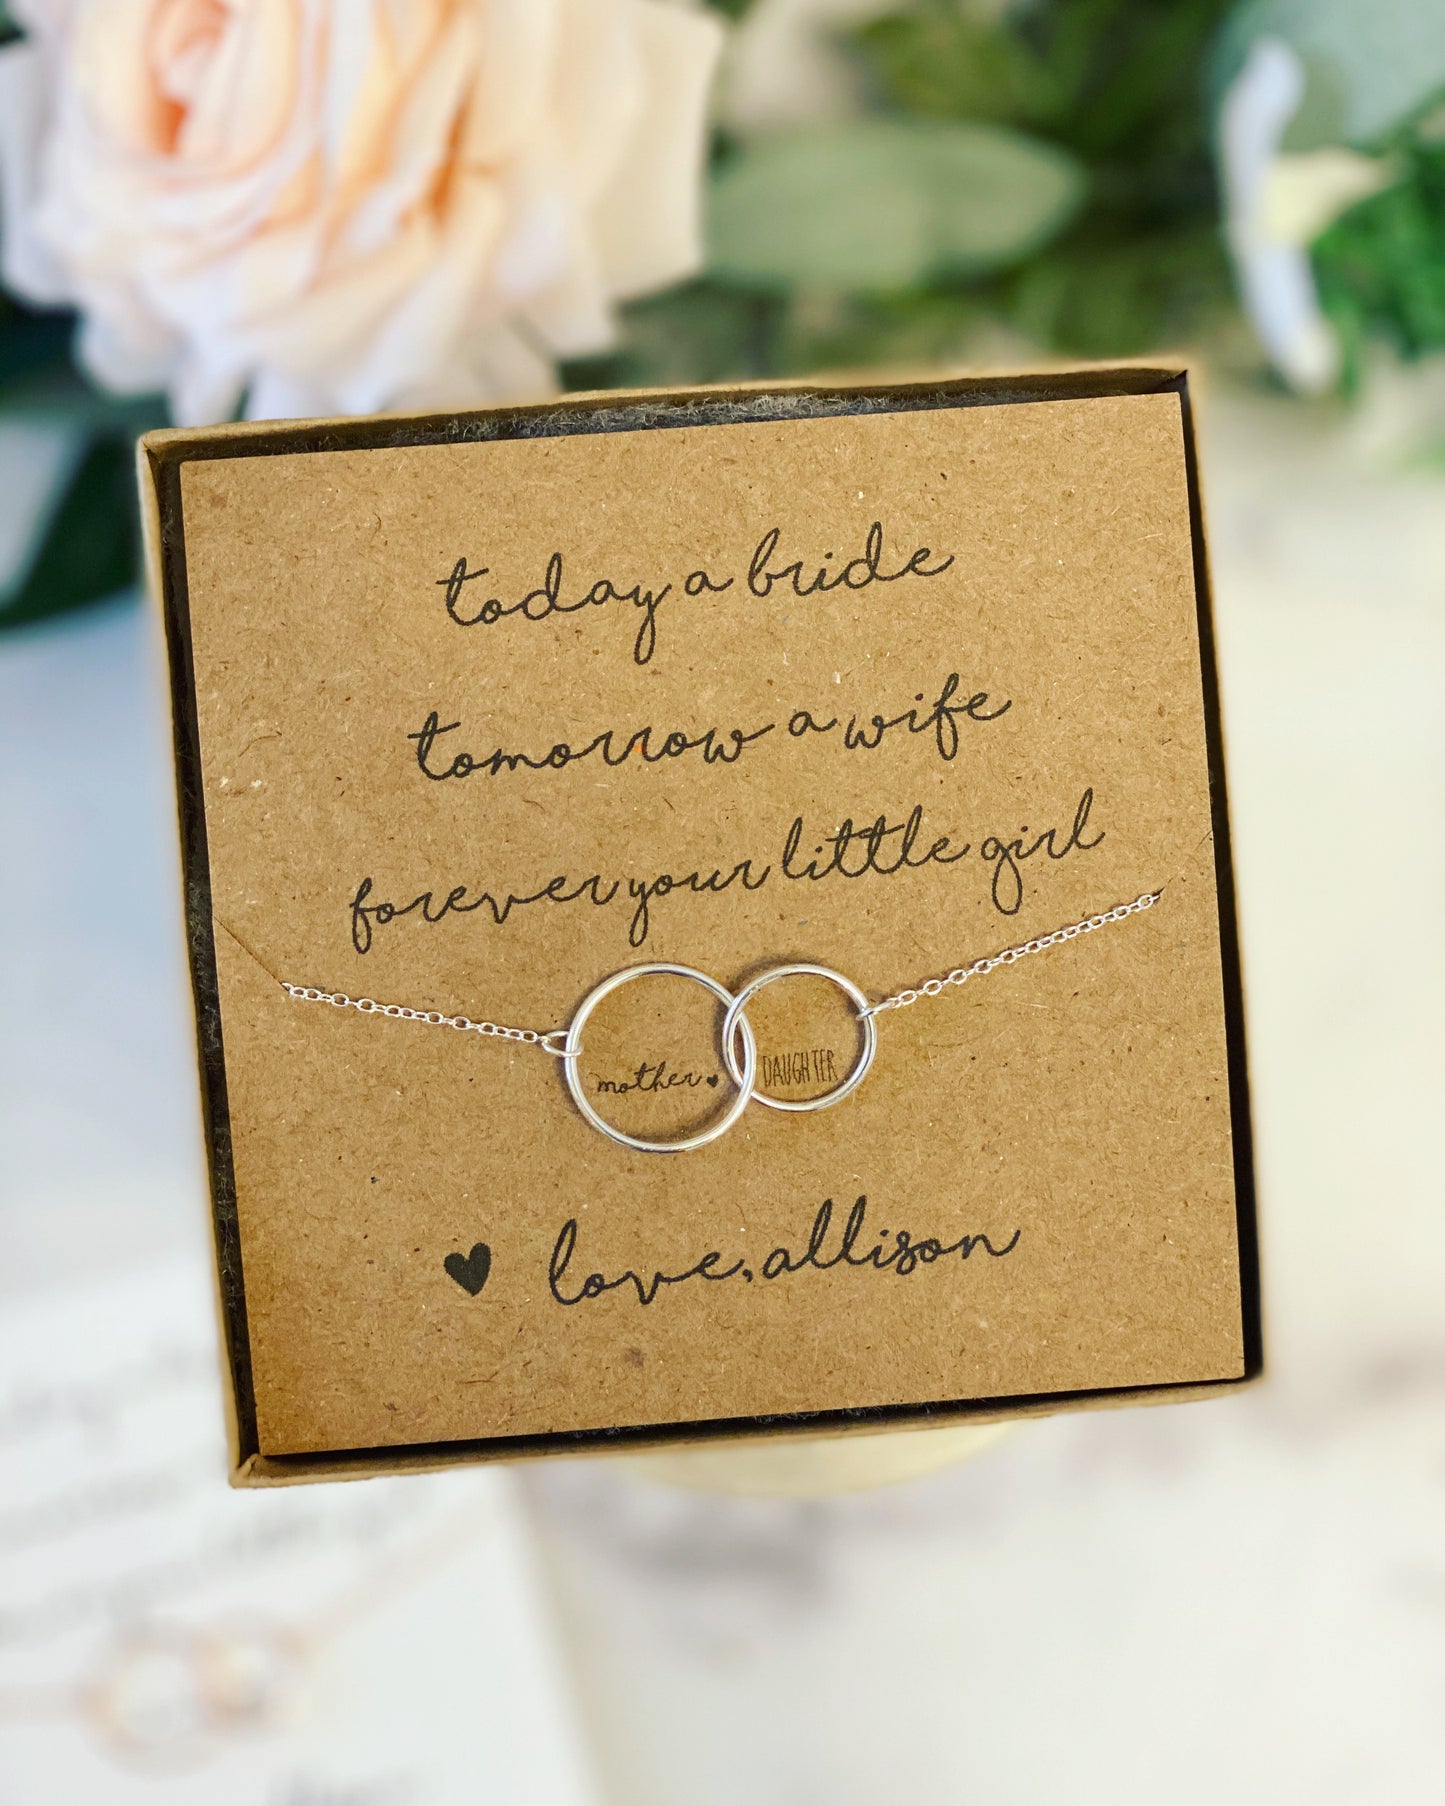 Today a Bride, mother of the bride Infinity necklace!